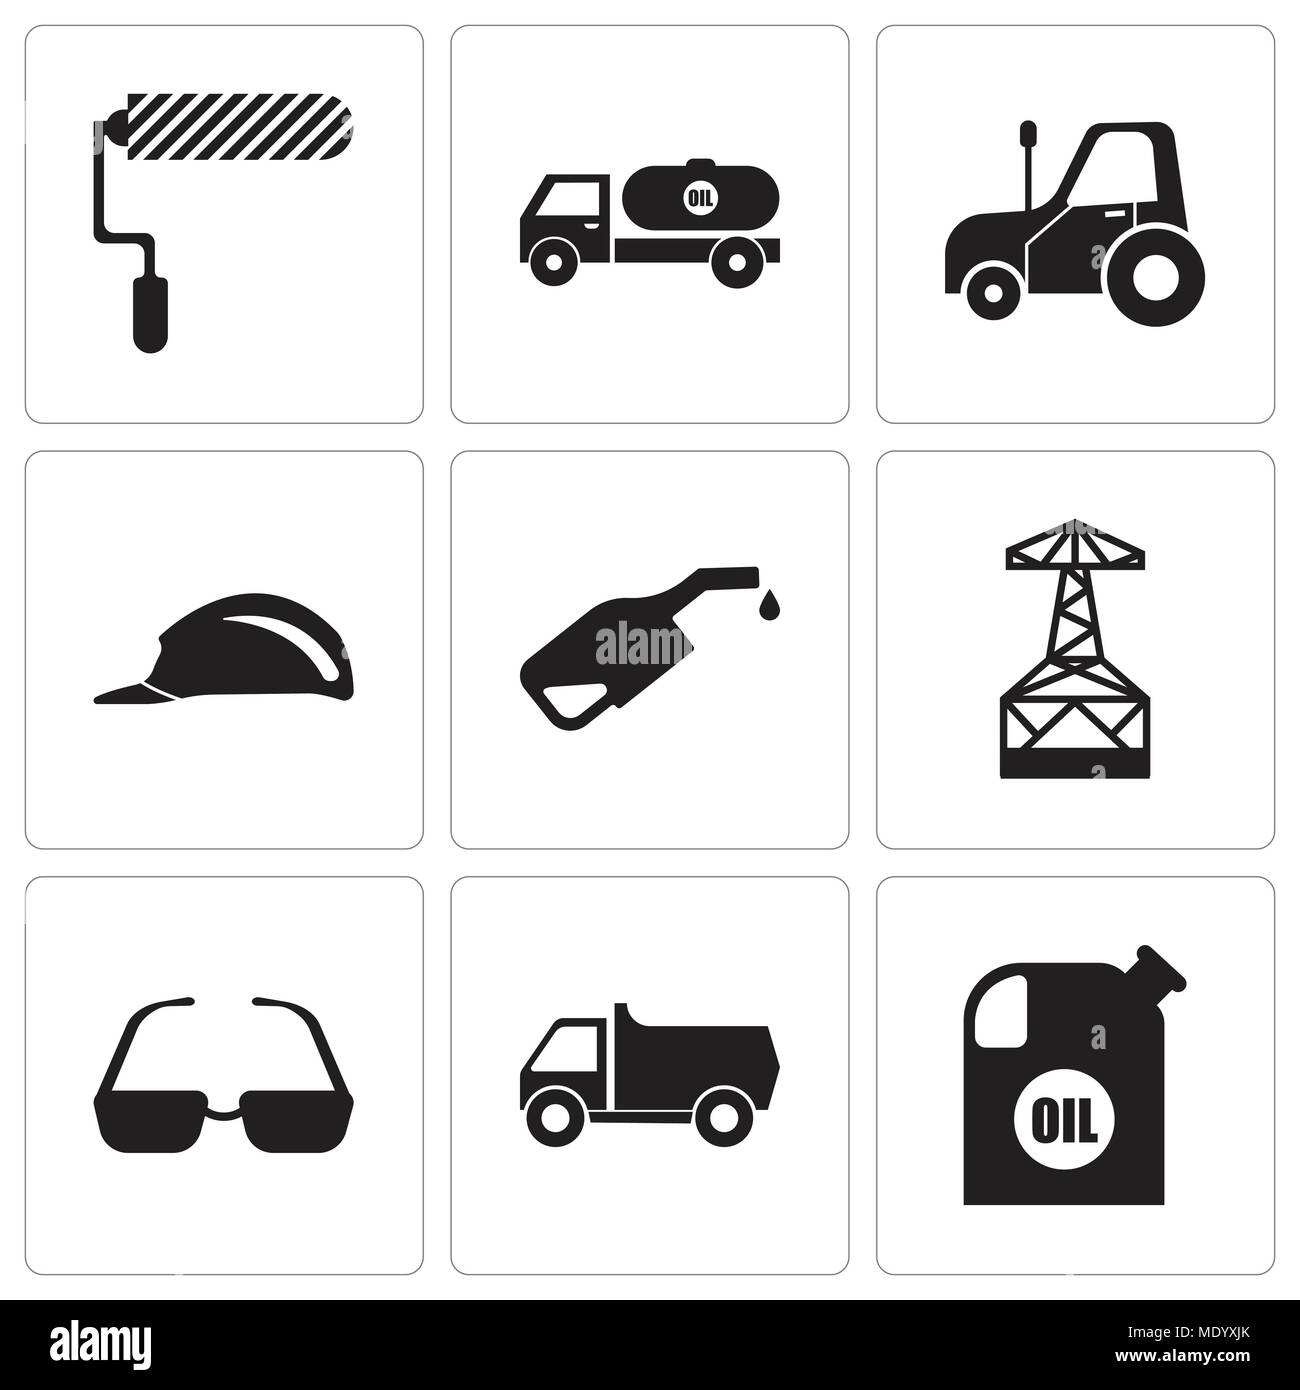 Set Of 9 simple editable icons such as oil container, truck, sunglasses, oil derrick, pump, header, autotruck, tipper, roller, can be used for mobile, Stock Vector